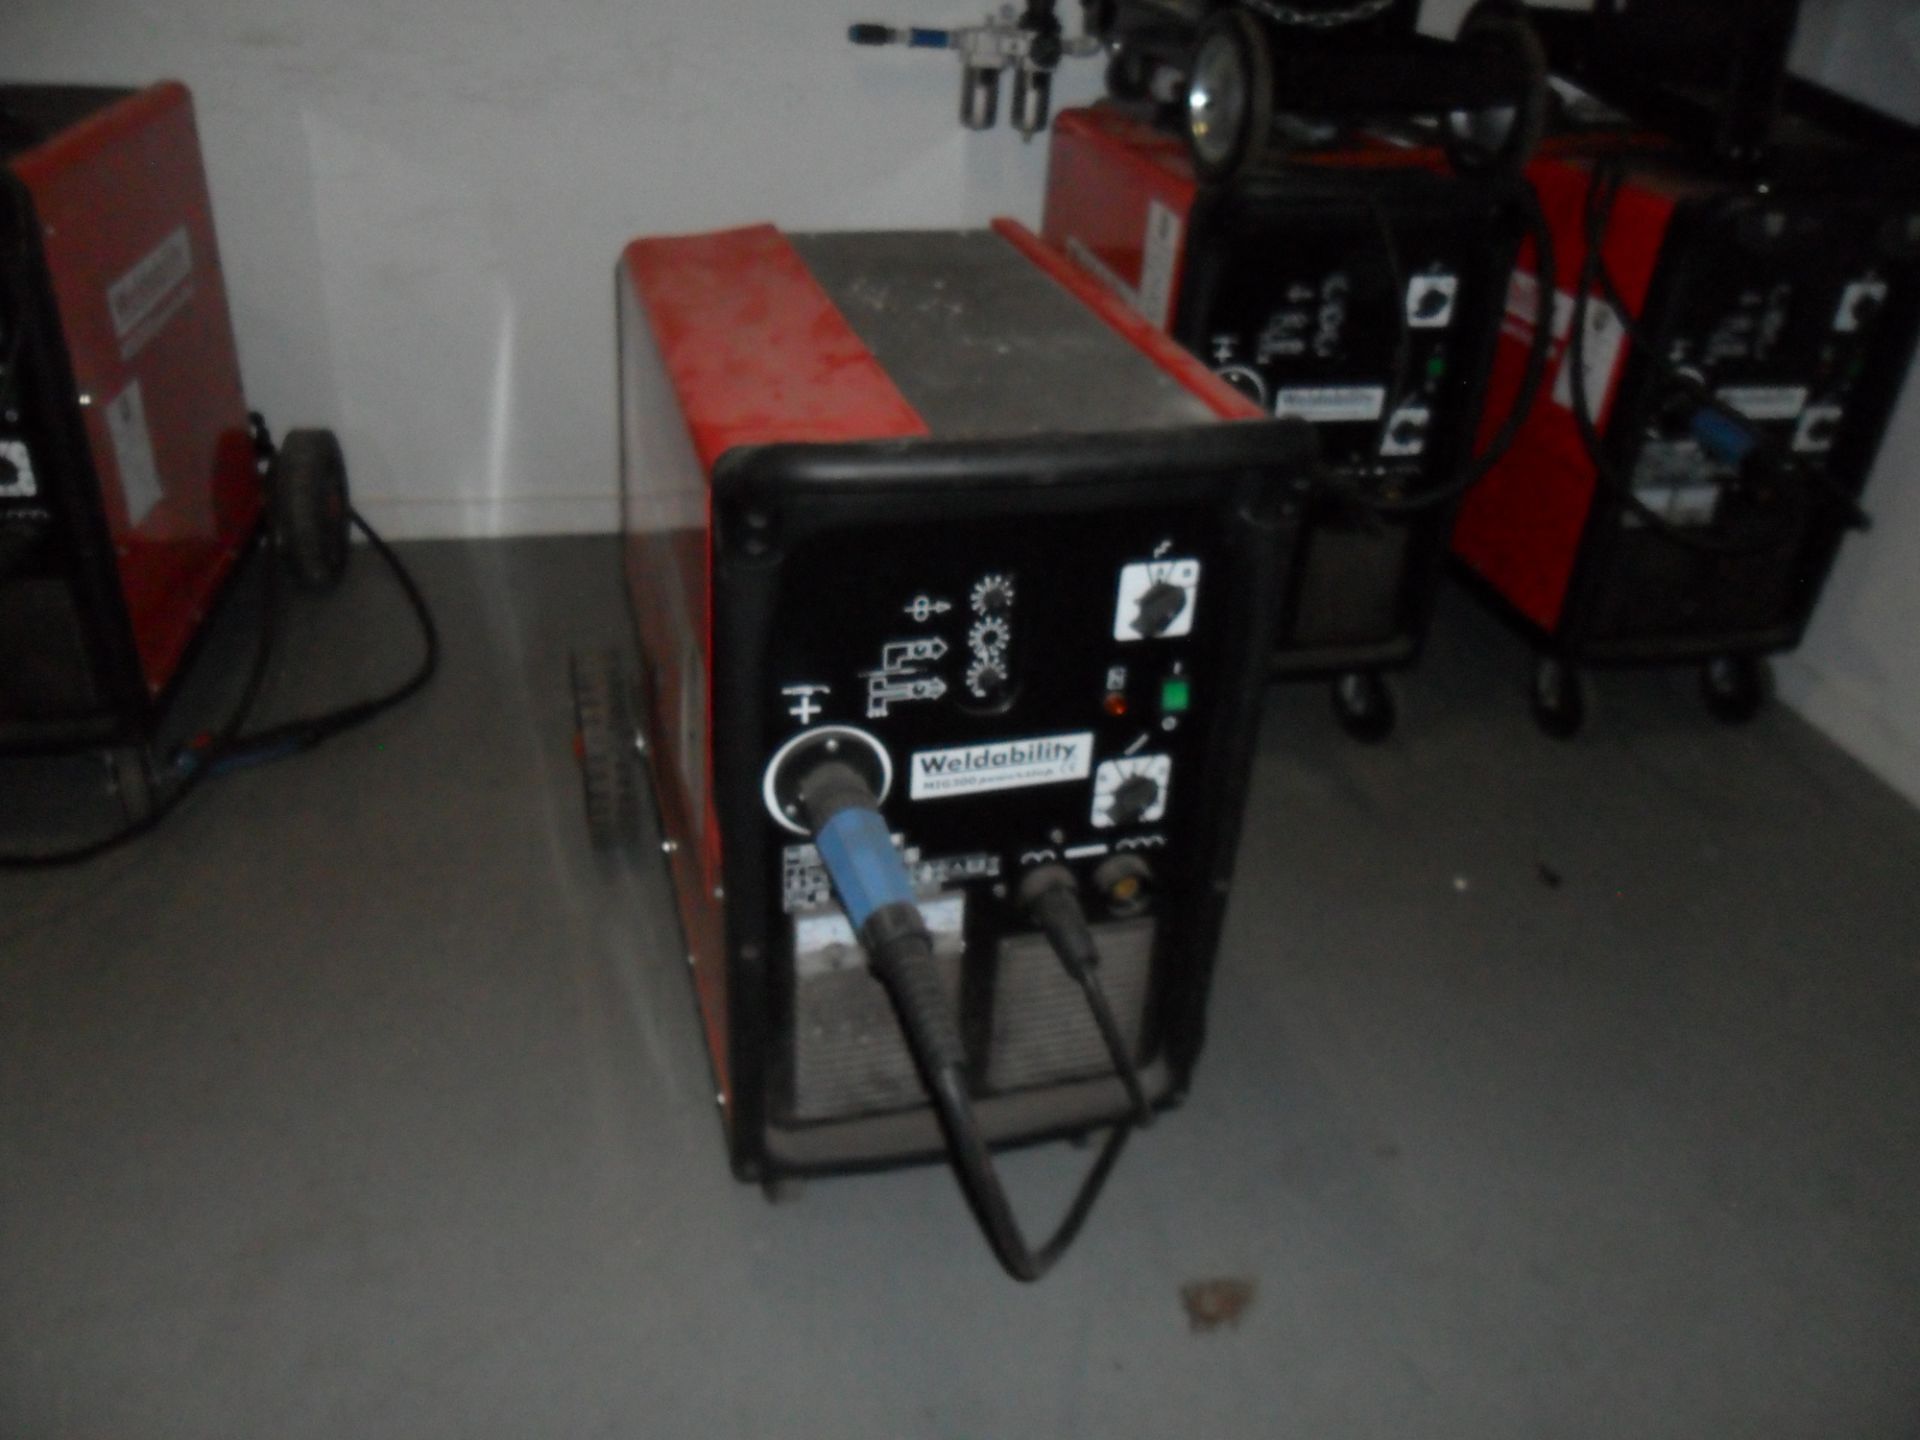 Weldability Mig 300 Powerstep. Welder includes leads and welding torch if shown in photo.